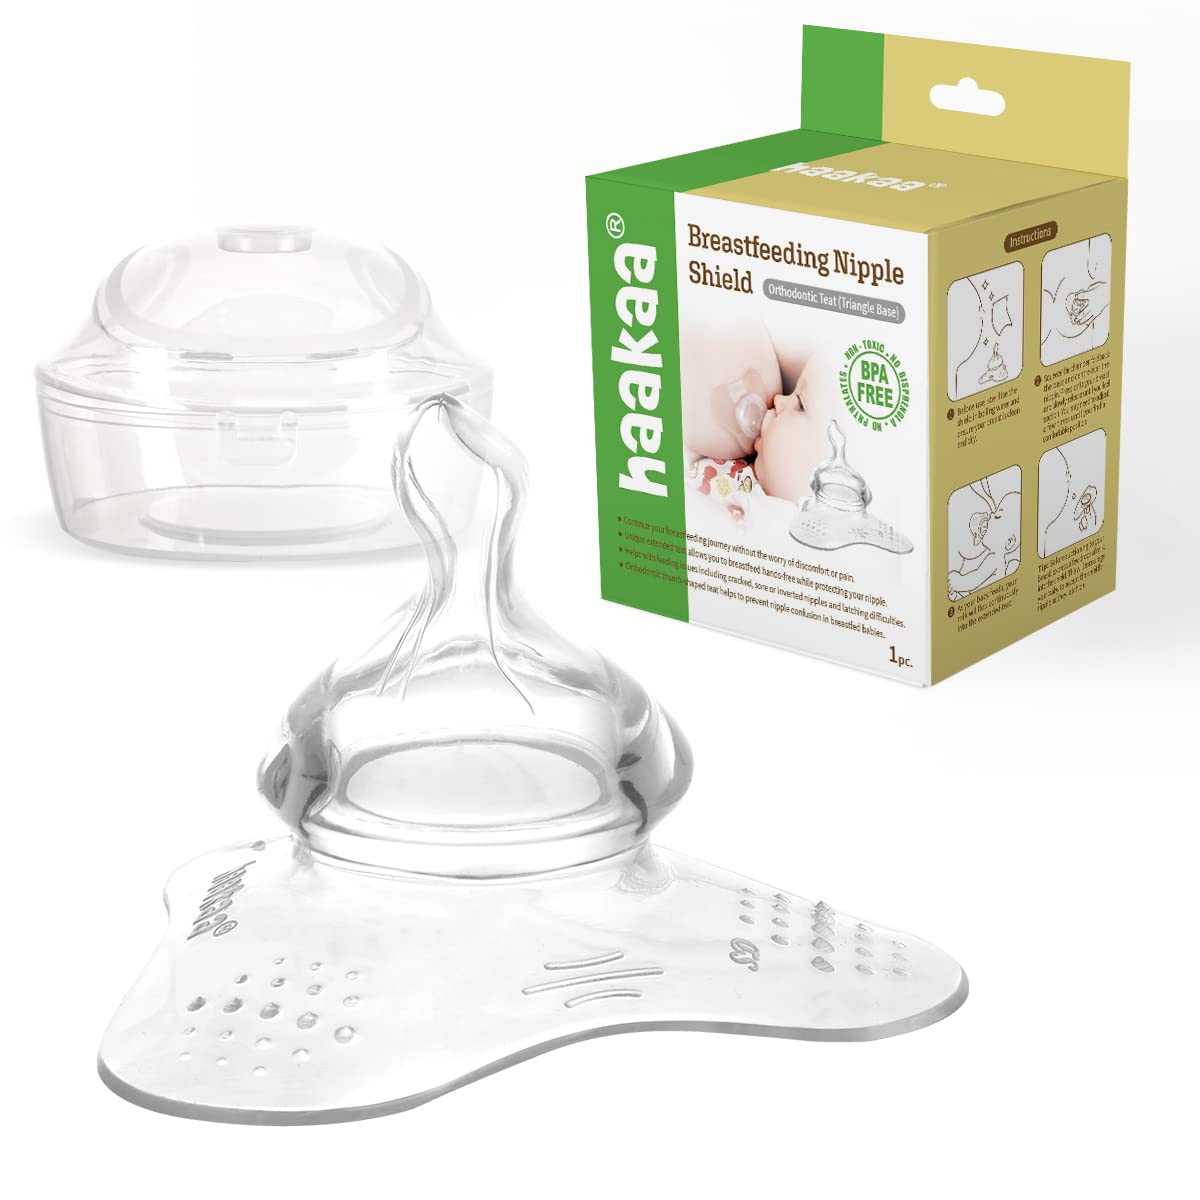 haakaa Nipple Shield Orthodontic Teat for Cracked Flat Inverted Nipple and Latch On Difficulties to Help Mums Continue Breastfeeding (Triangle Base, 1pk)